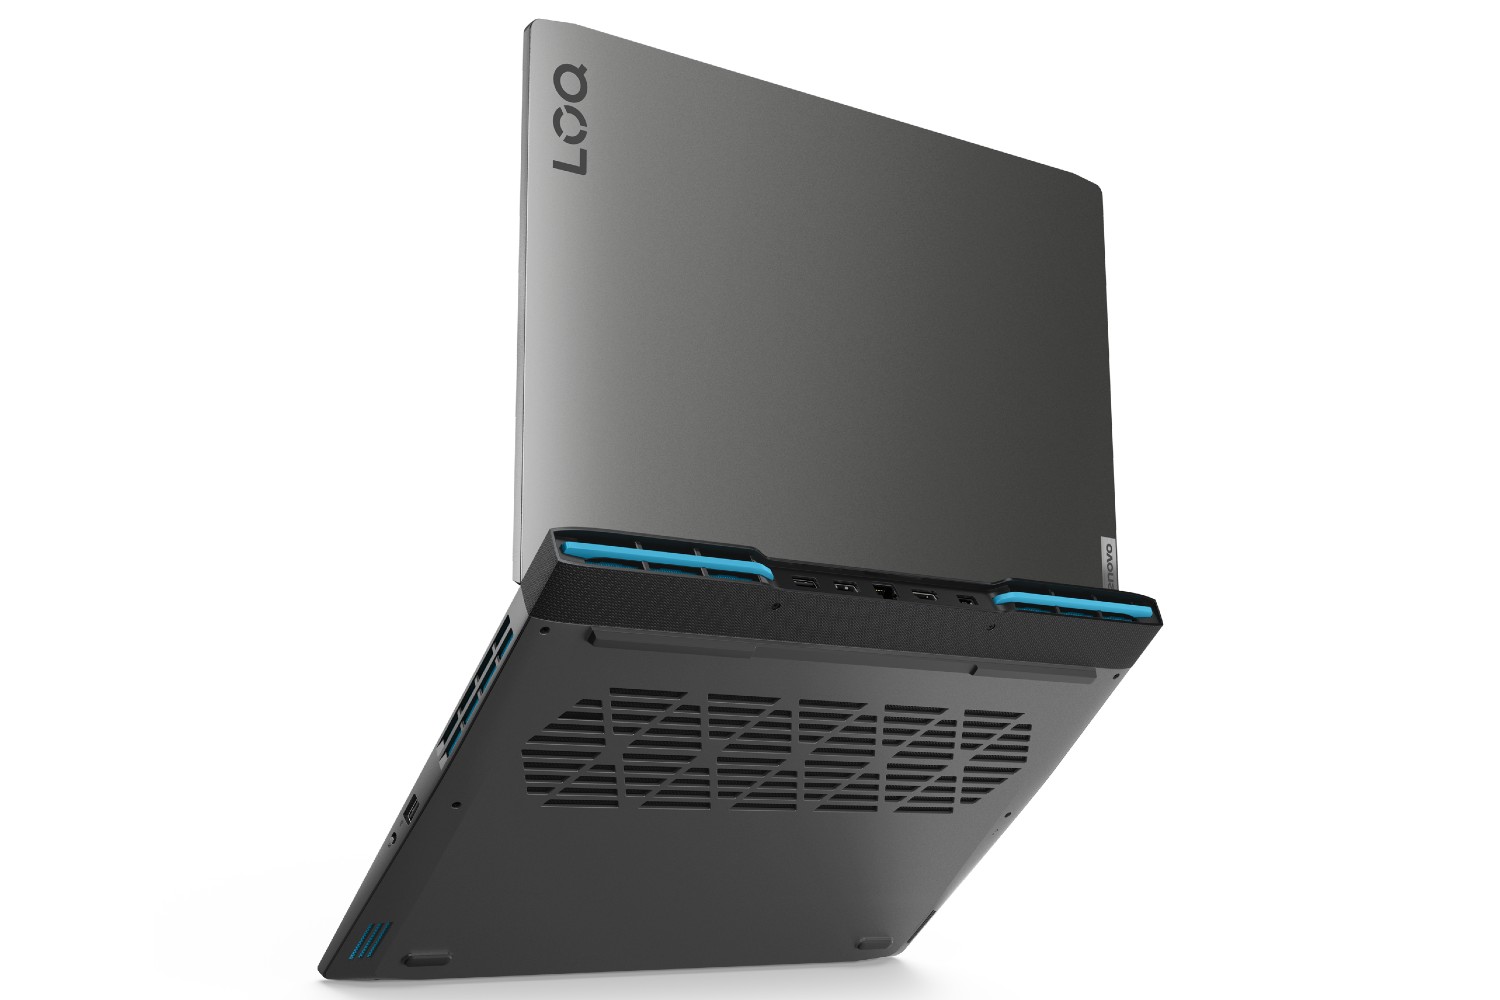 A press photo showing the back of the LOQ gaming laptop by Lenovo.